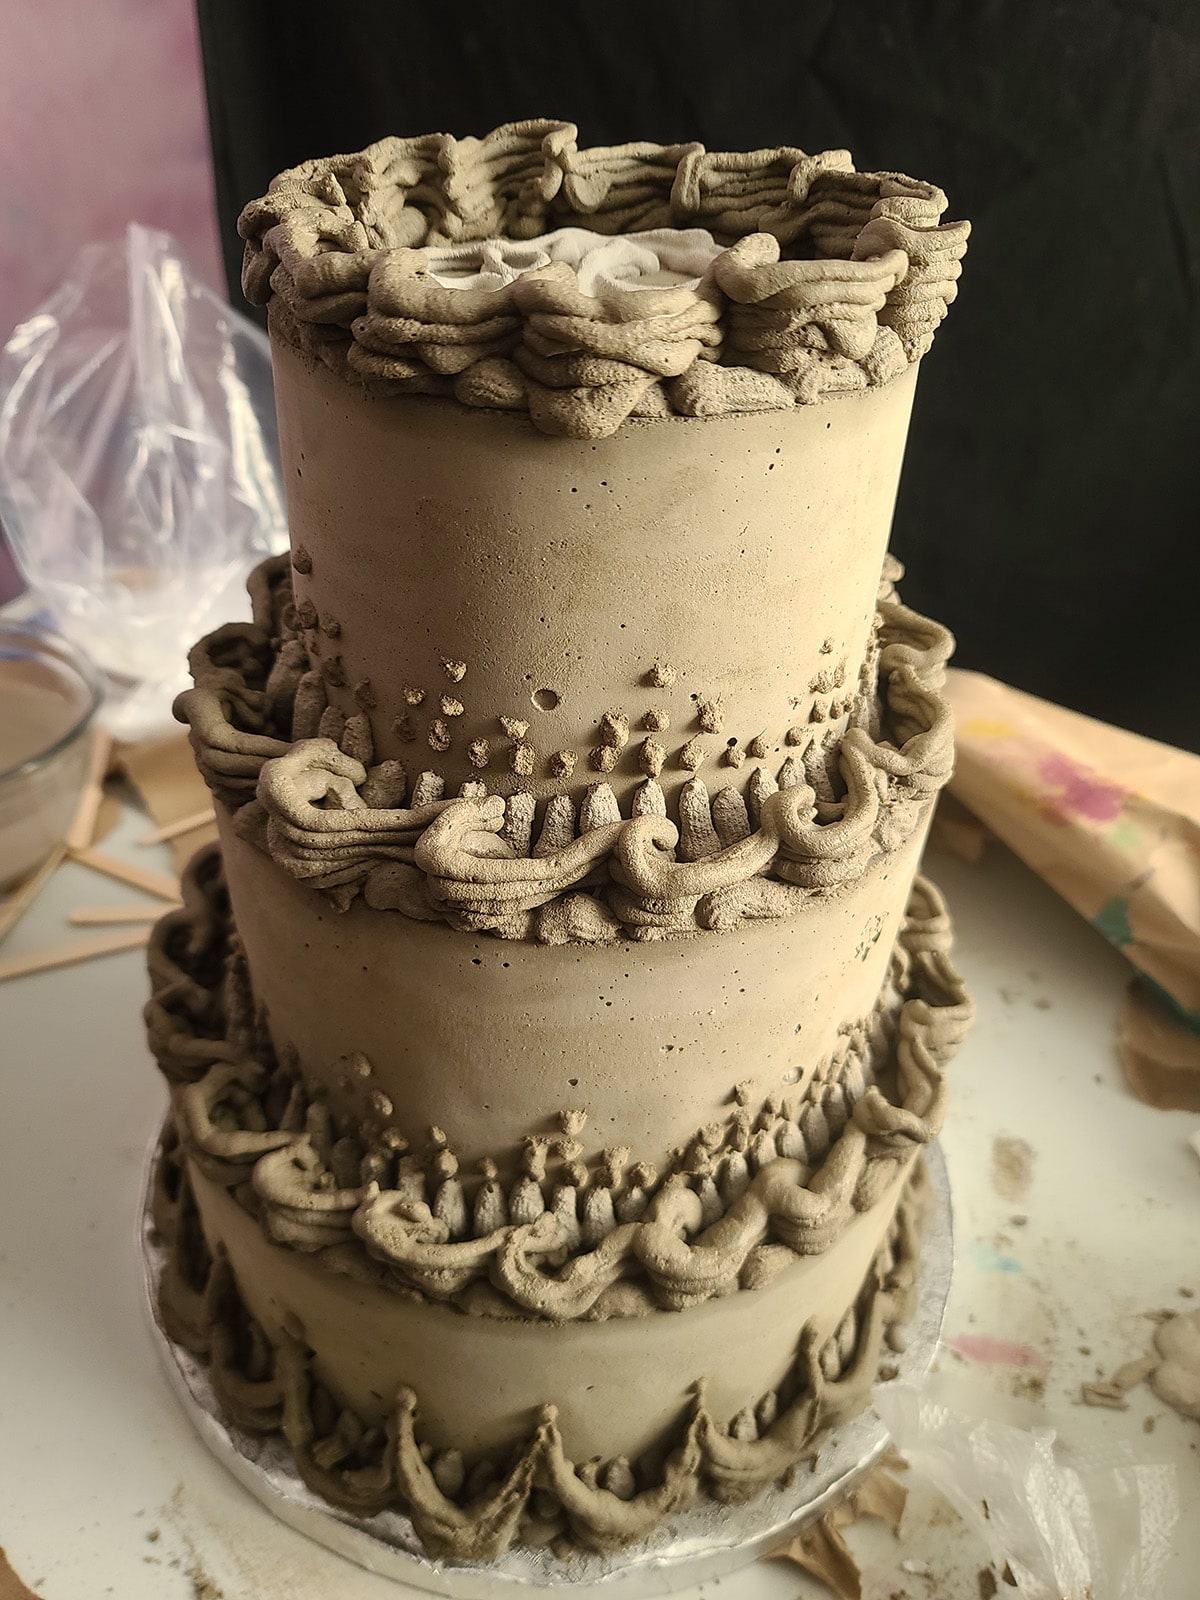 A 3 tiered wedding cake - Lambeth style - completely made from cement.